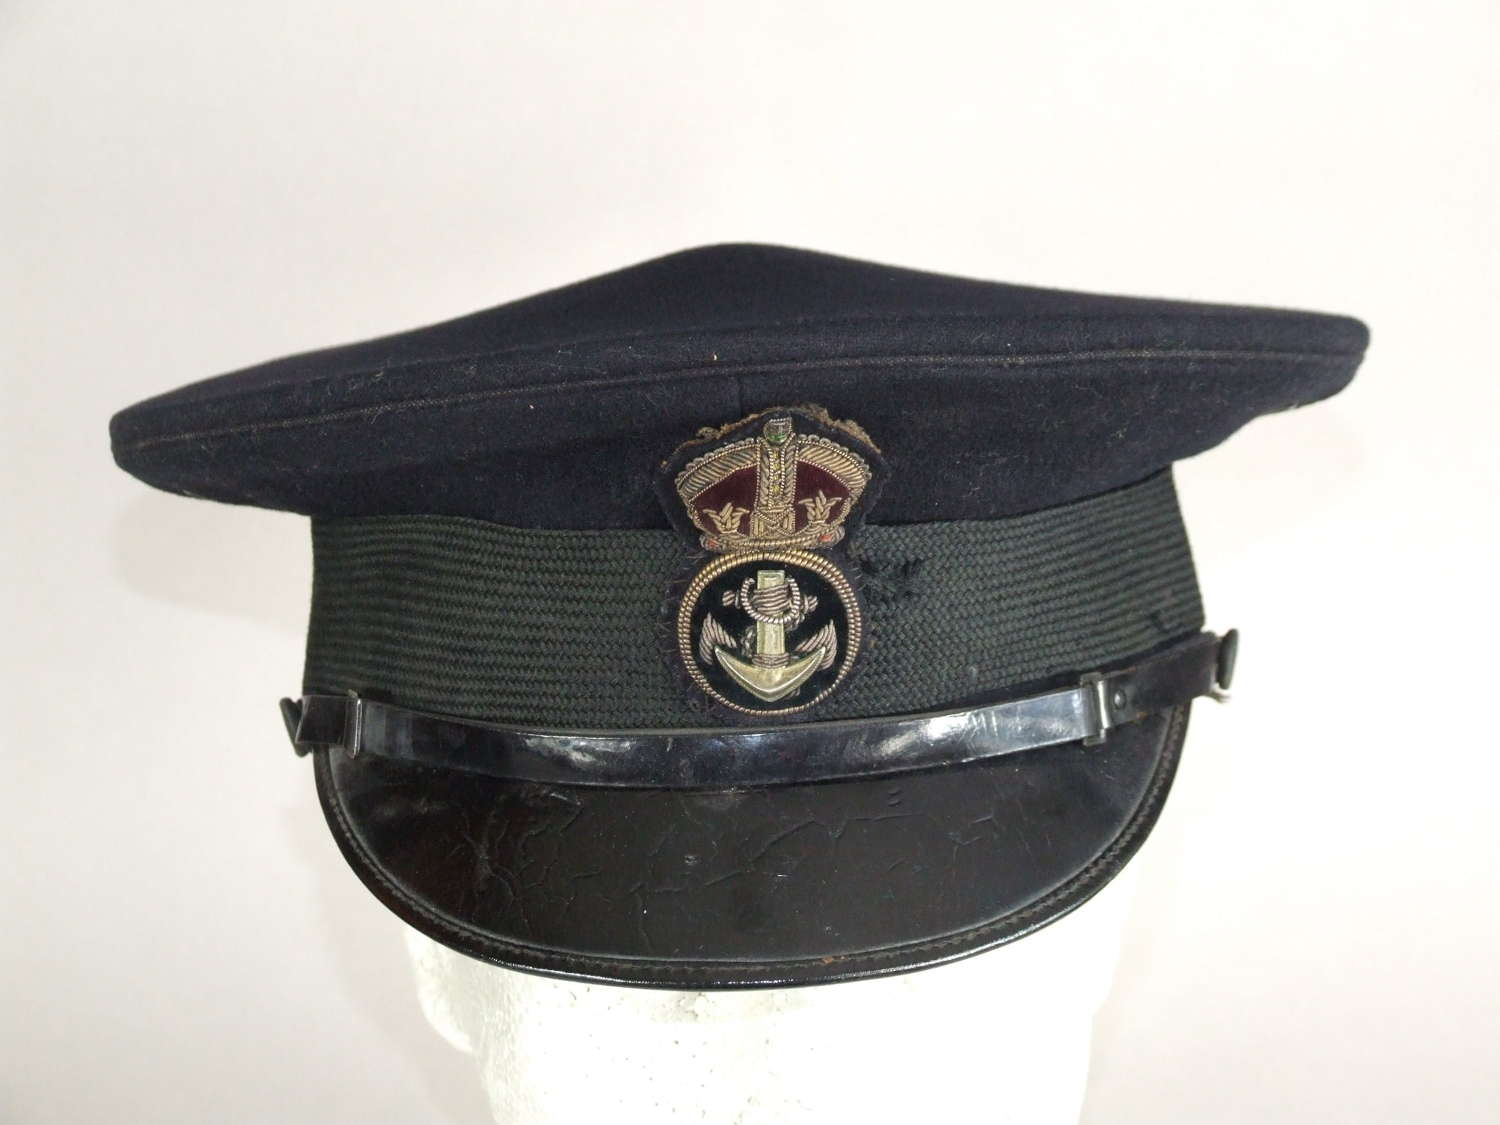 King's Crown Royal Navy Petty Officer's Cap